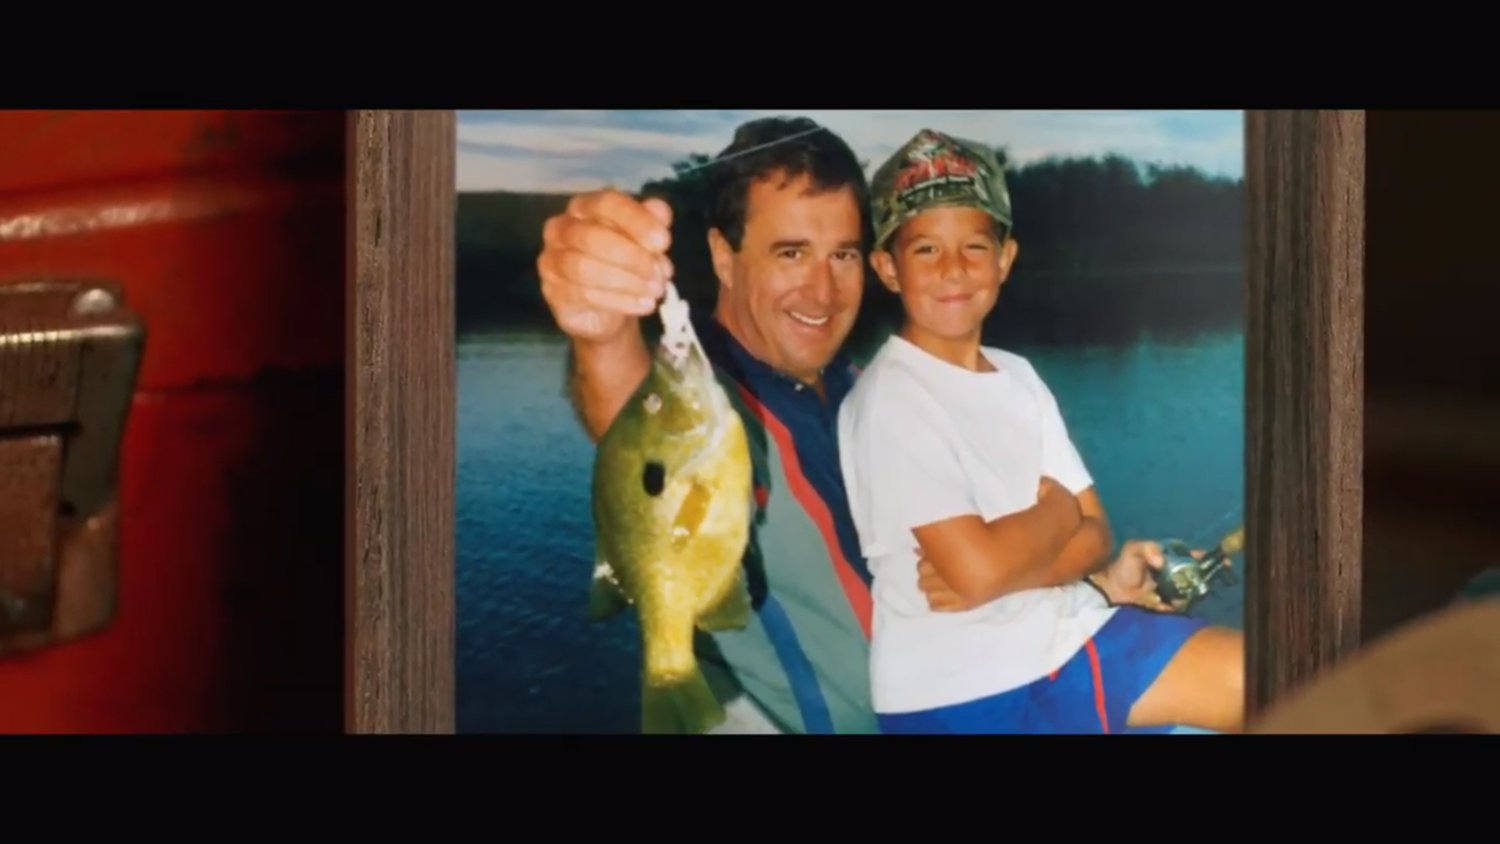 Bass Pro Shops founder Johnny Morris is featured on a fishing trip in a commercial set to air this weekend during the Super Bowl.